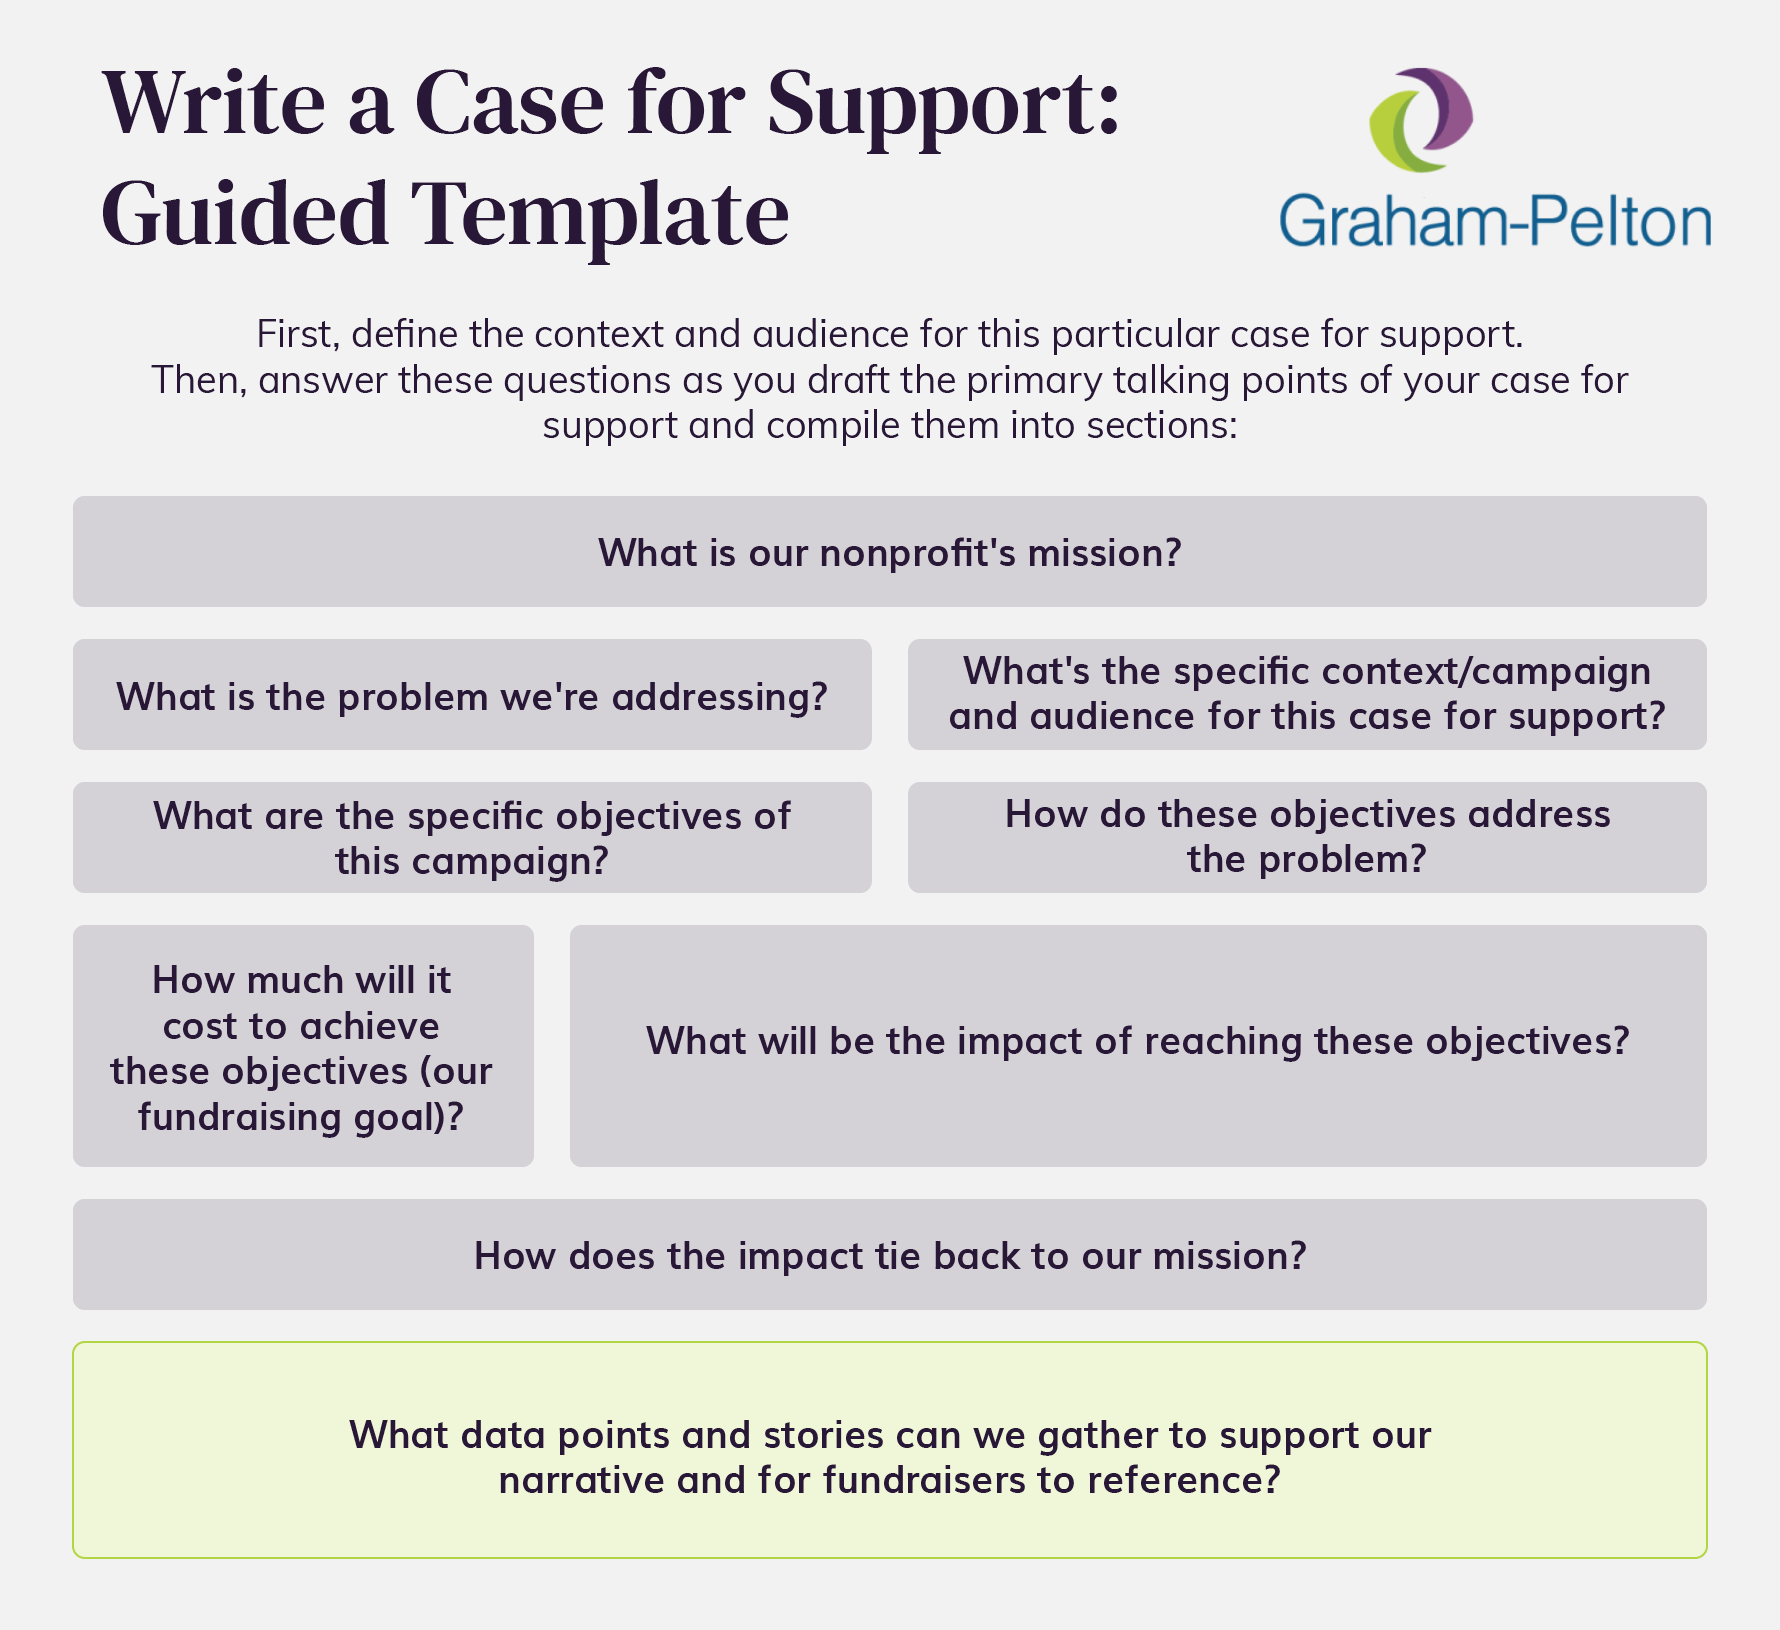 A guided template for drafting a fundraising case for support, with the key sections detailed in the text below.